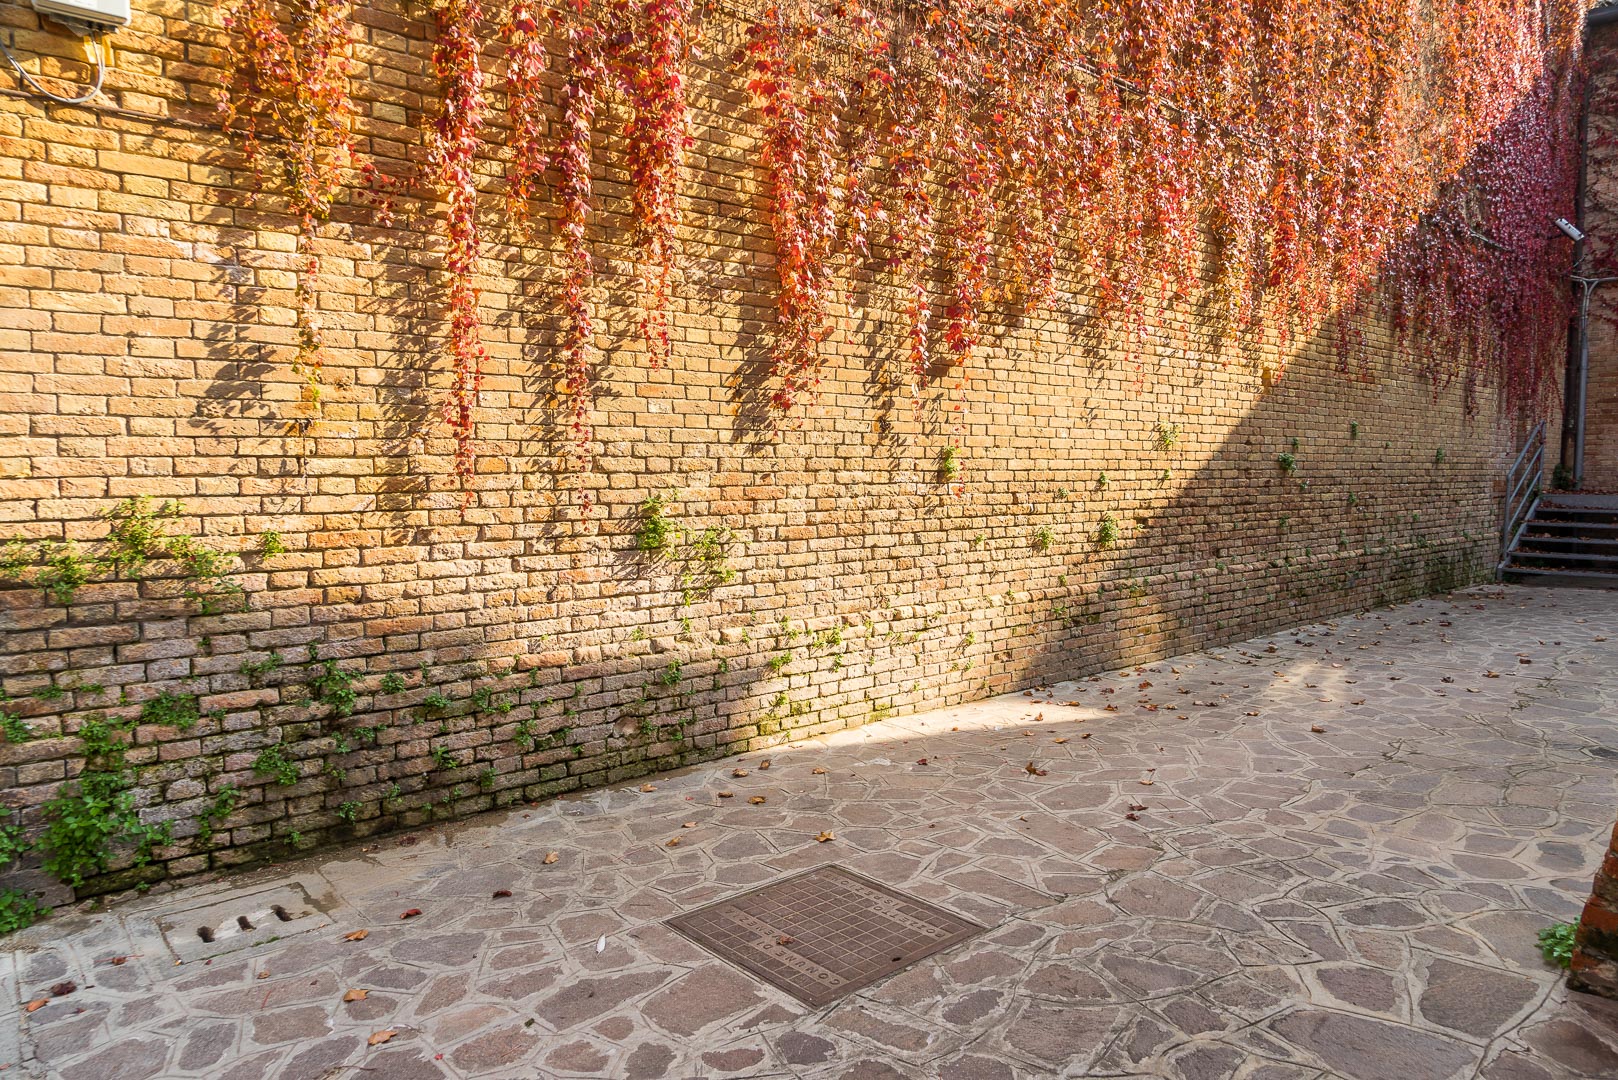 Backplate • ID: 9820 • HDRI Haven - Street With Brick Wall Covered With Leaves